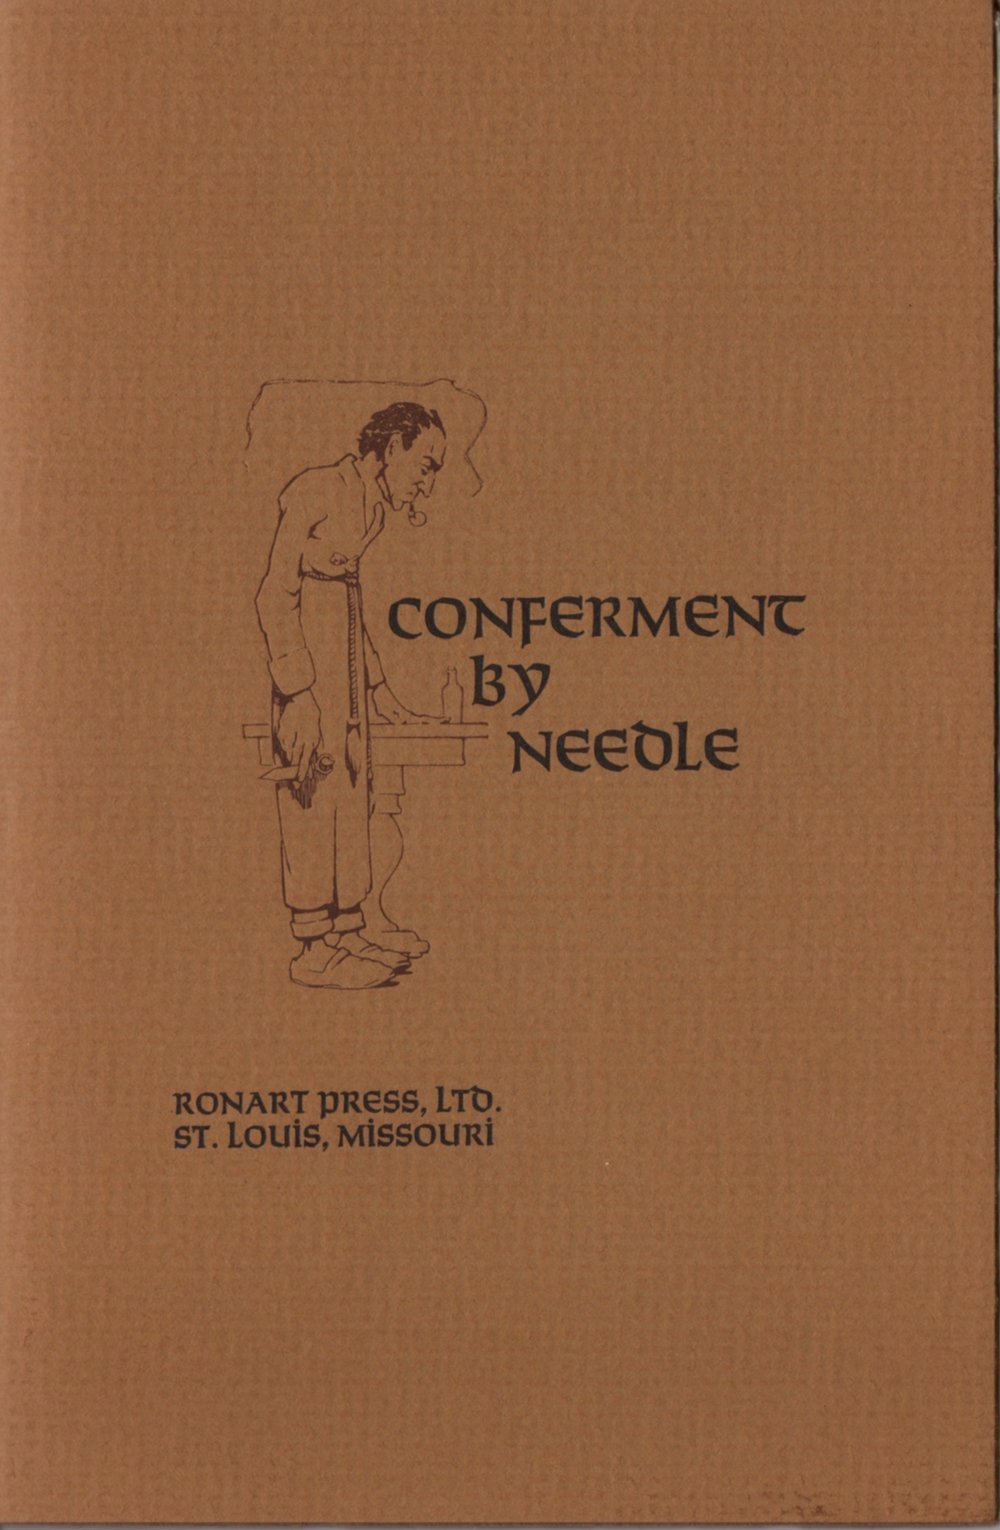 Conferment+by+Needle.jpg